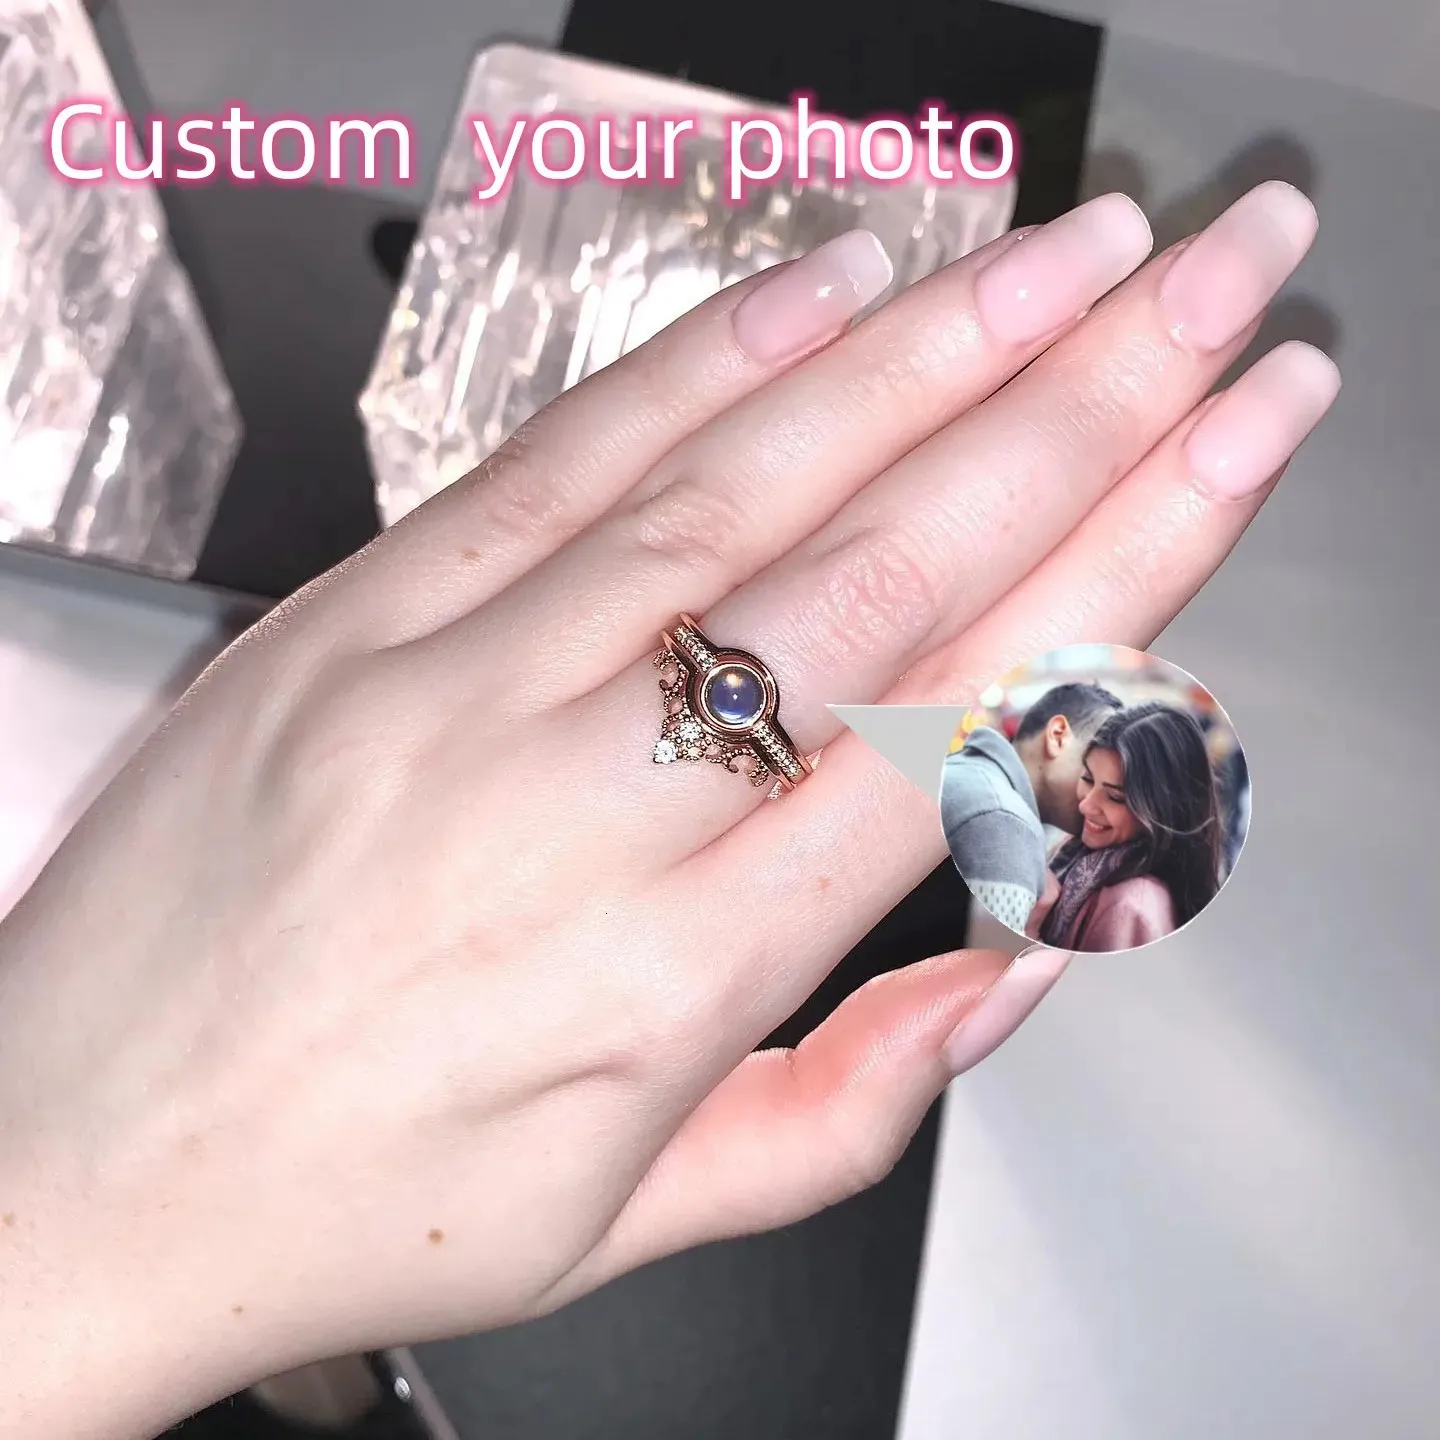 Wedding Rings Crystal Crown Po Custom Image Ring with Your Picture Family Memory Pet Personalized Projection Valentine's Day Gift 231030